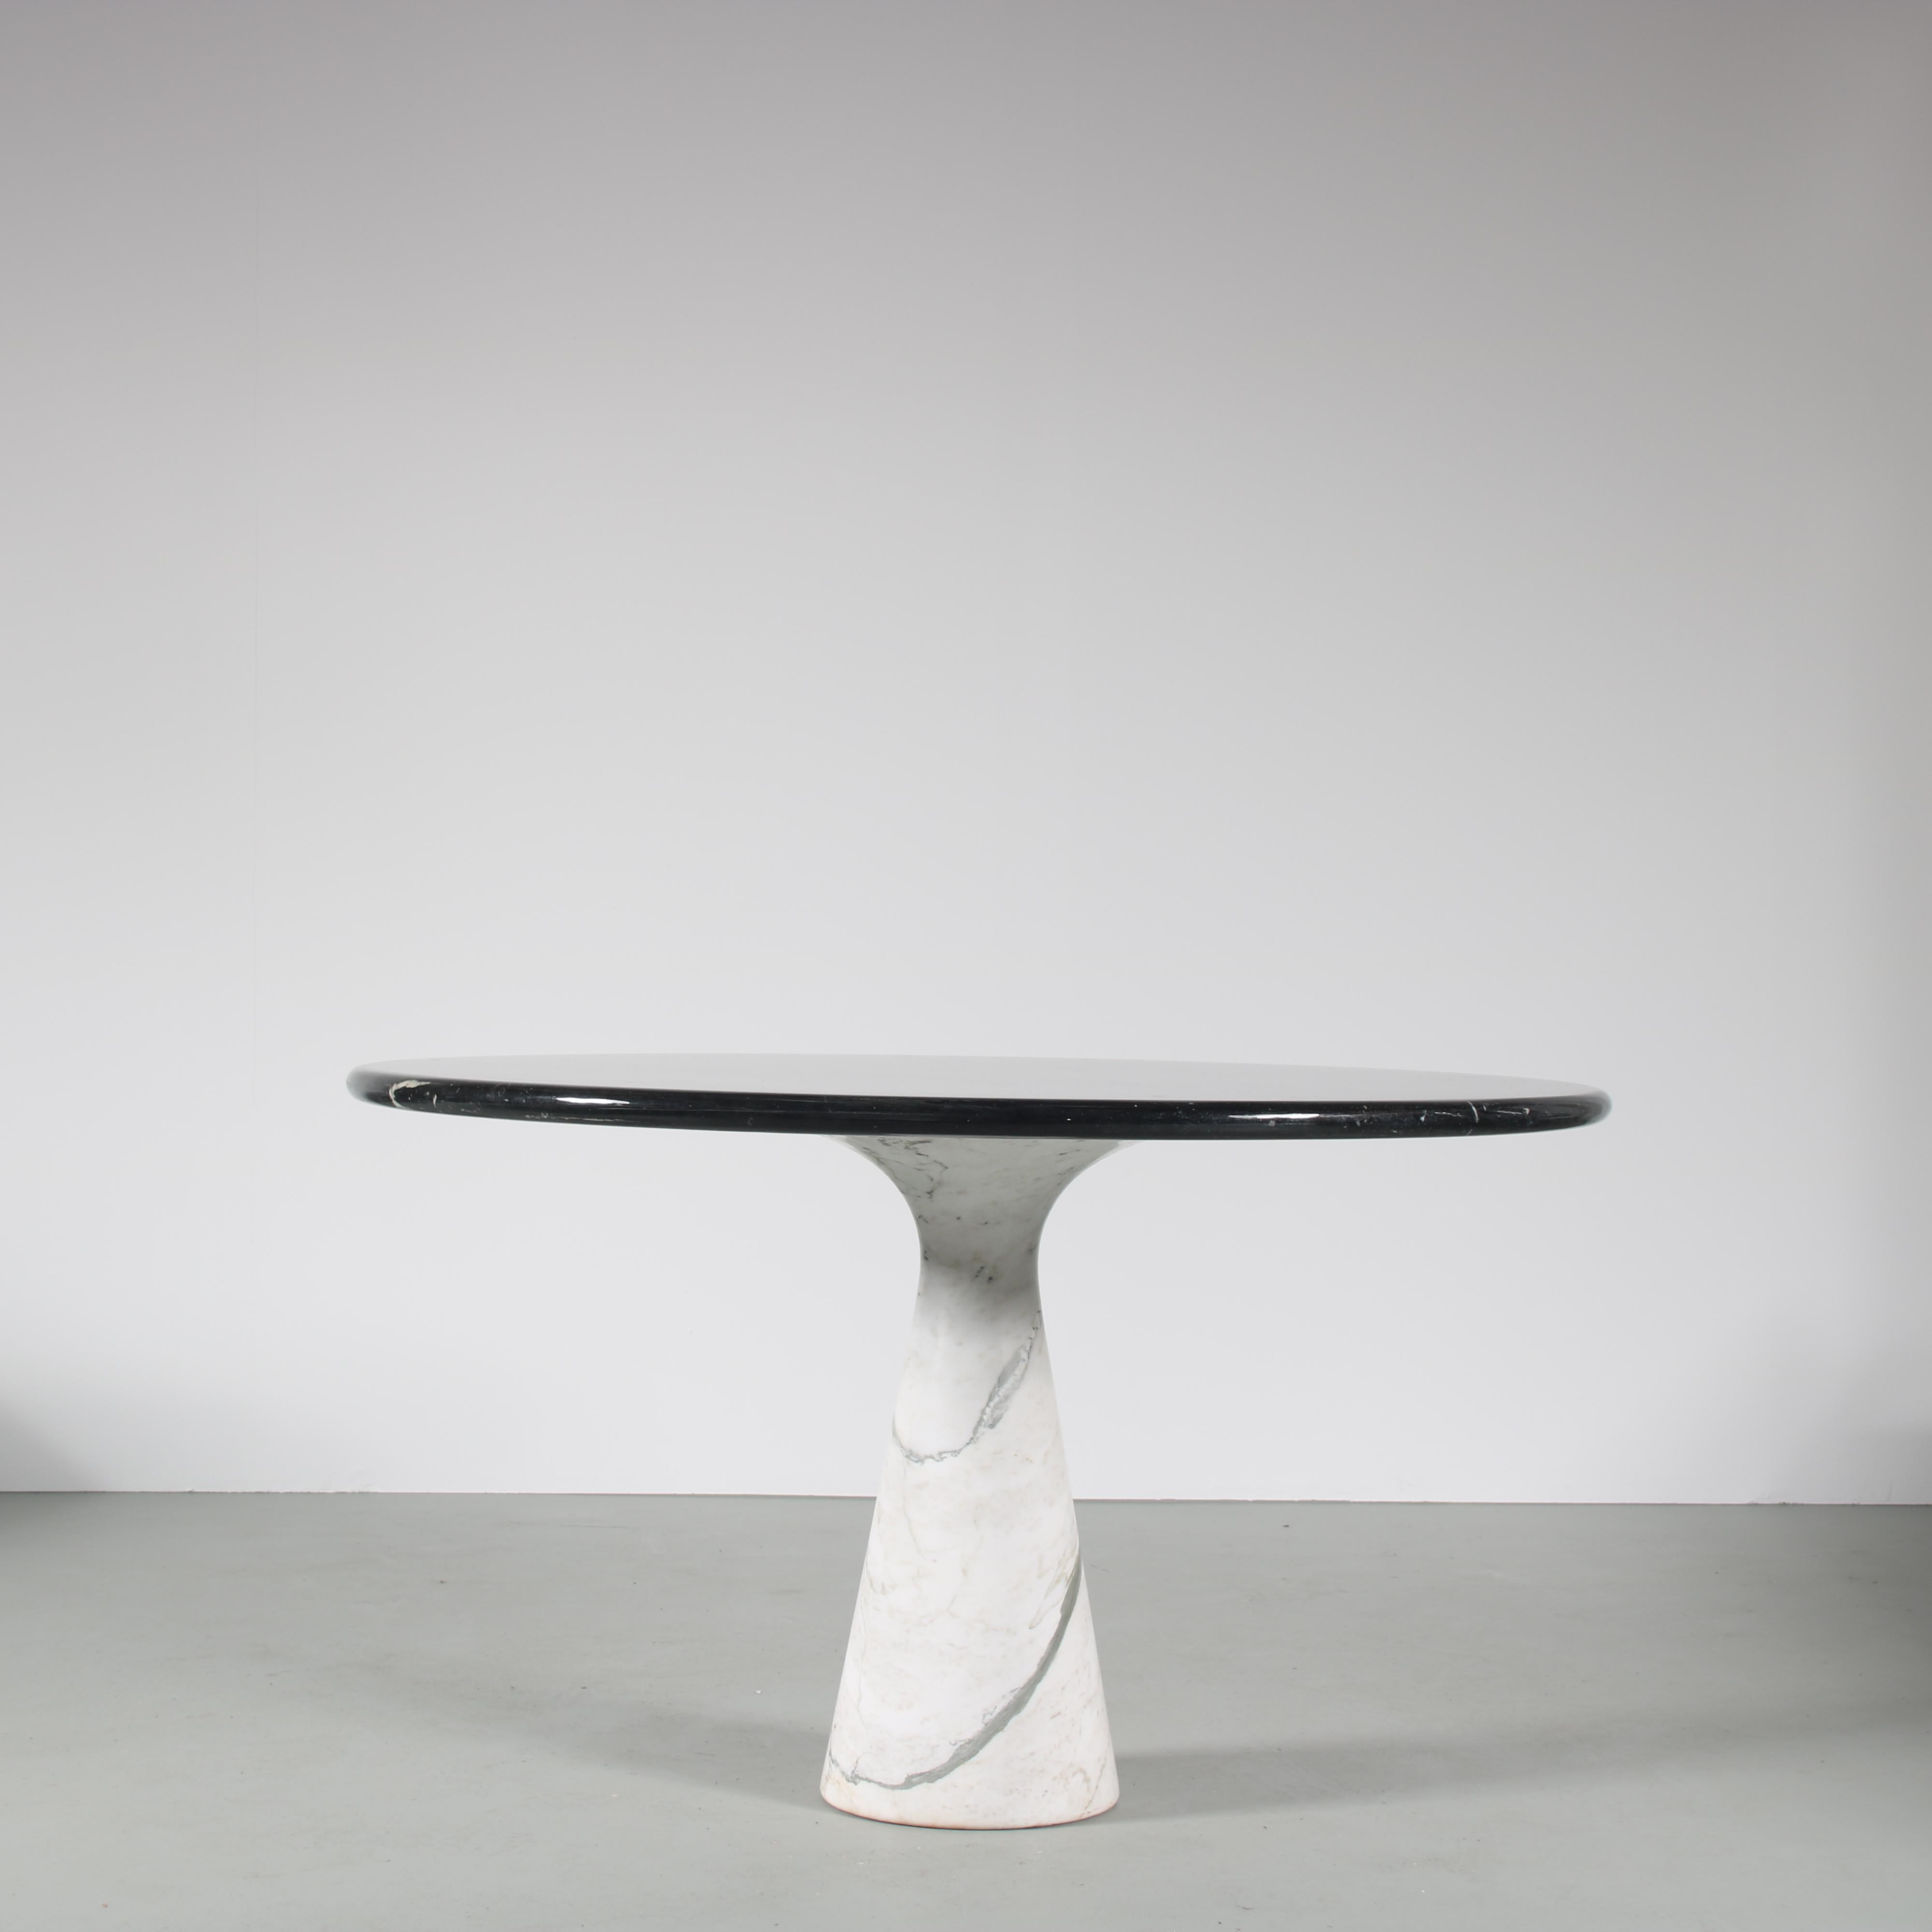 A fantastic dining table designed by Angelo Mangiarotti, manufactured by Skipper in Italy around 1960.

This impressive piece is made of high quality white marble with a round black marble top. A material that truly expresses luxury and elegance,